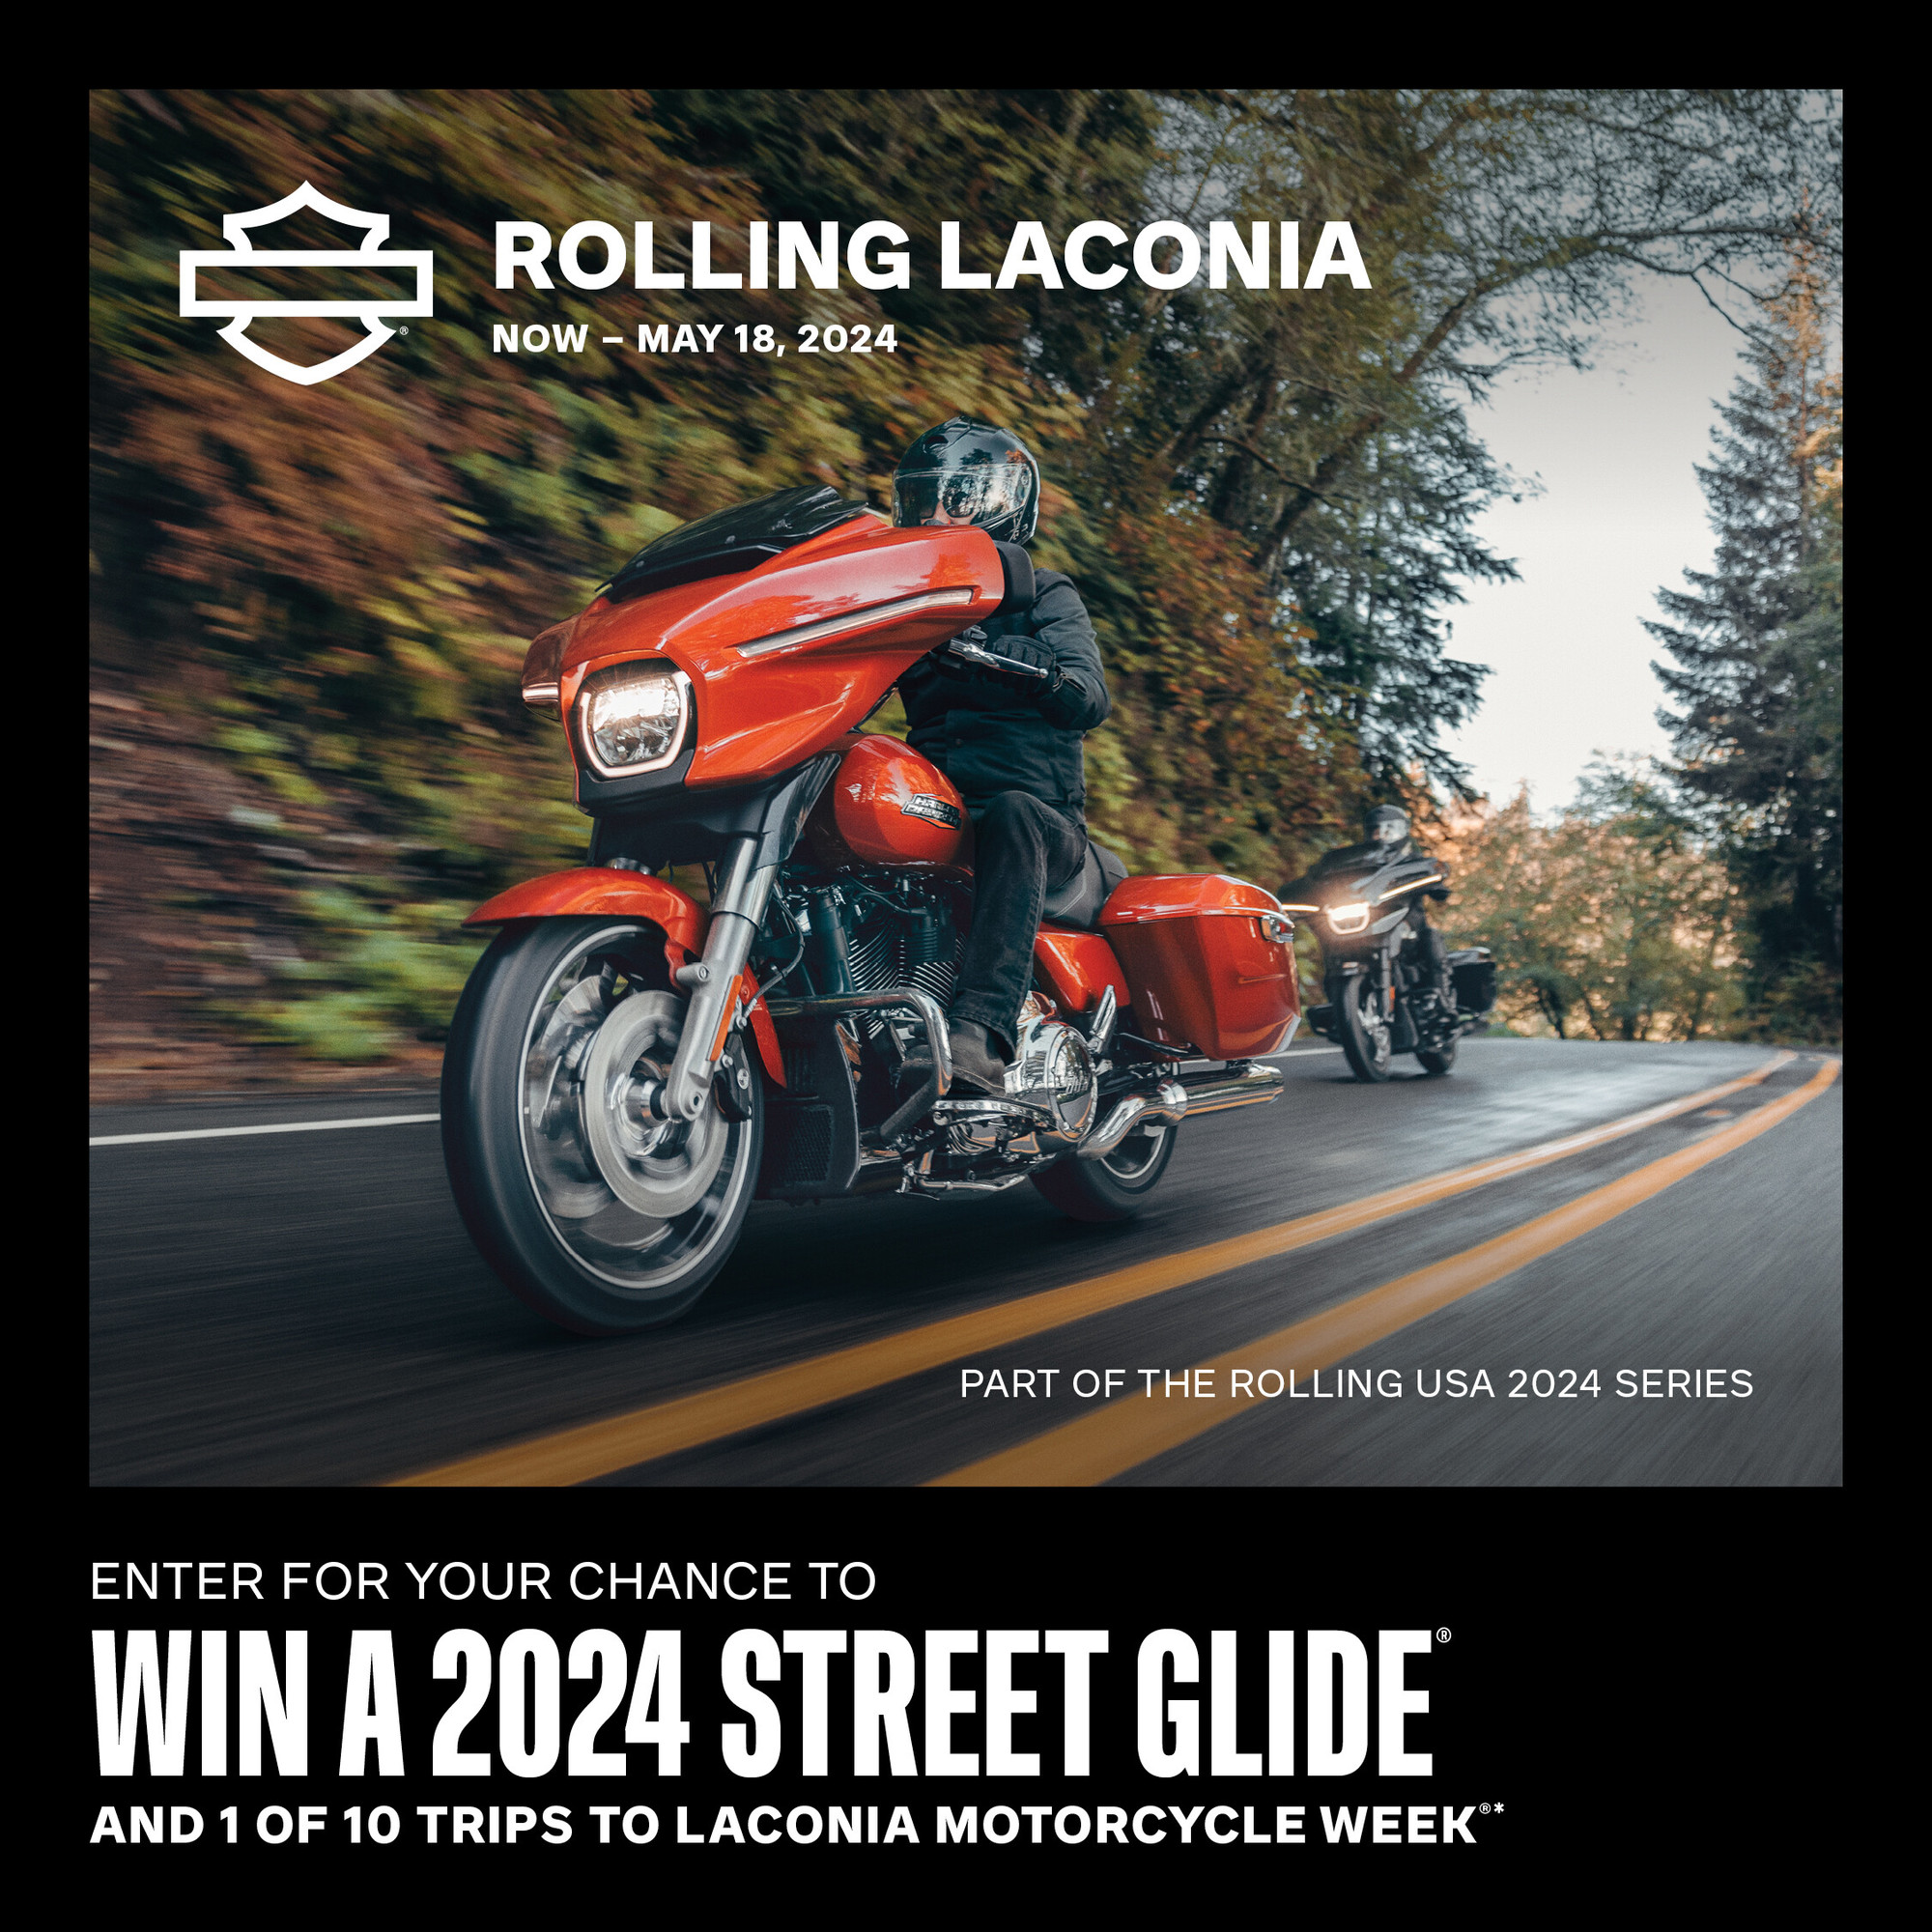 Win a 2024 Street Glide & a trip to Laconia Motorcycle Week!